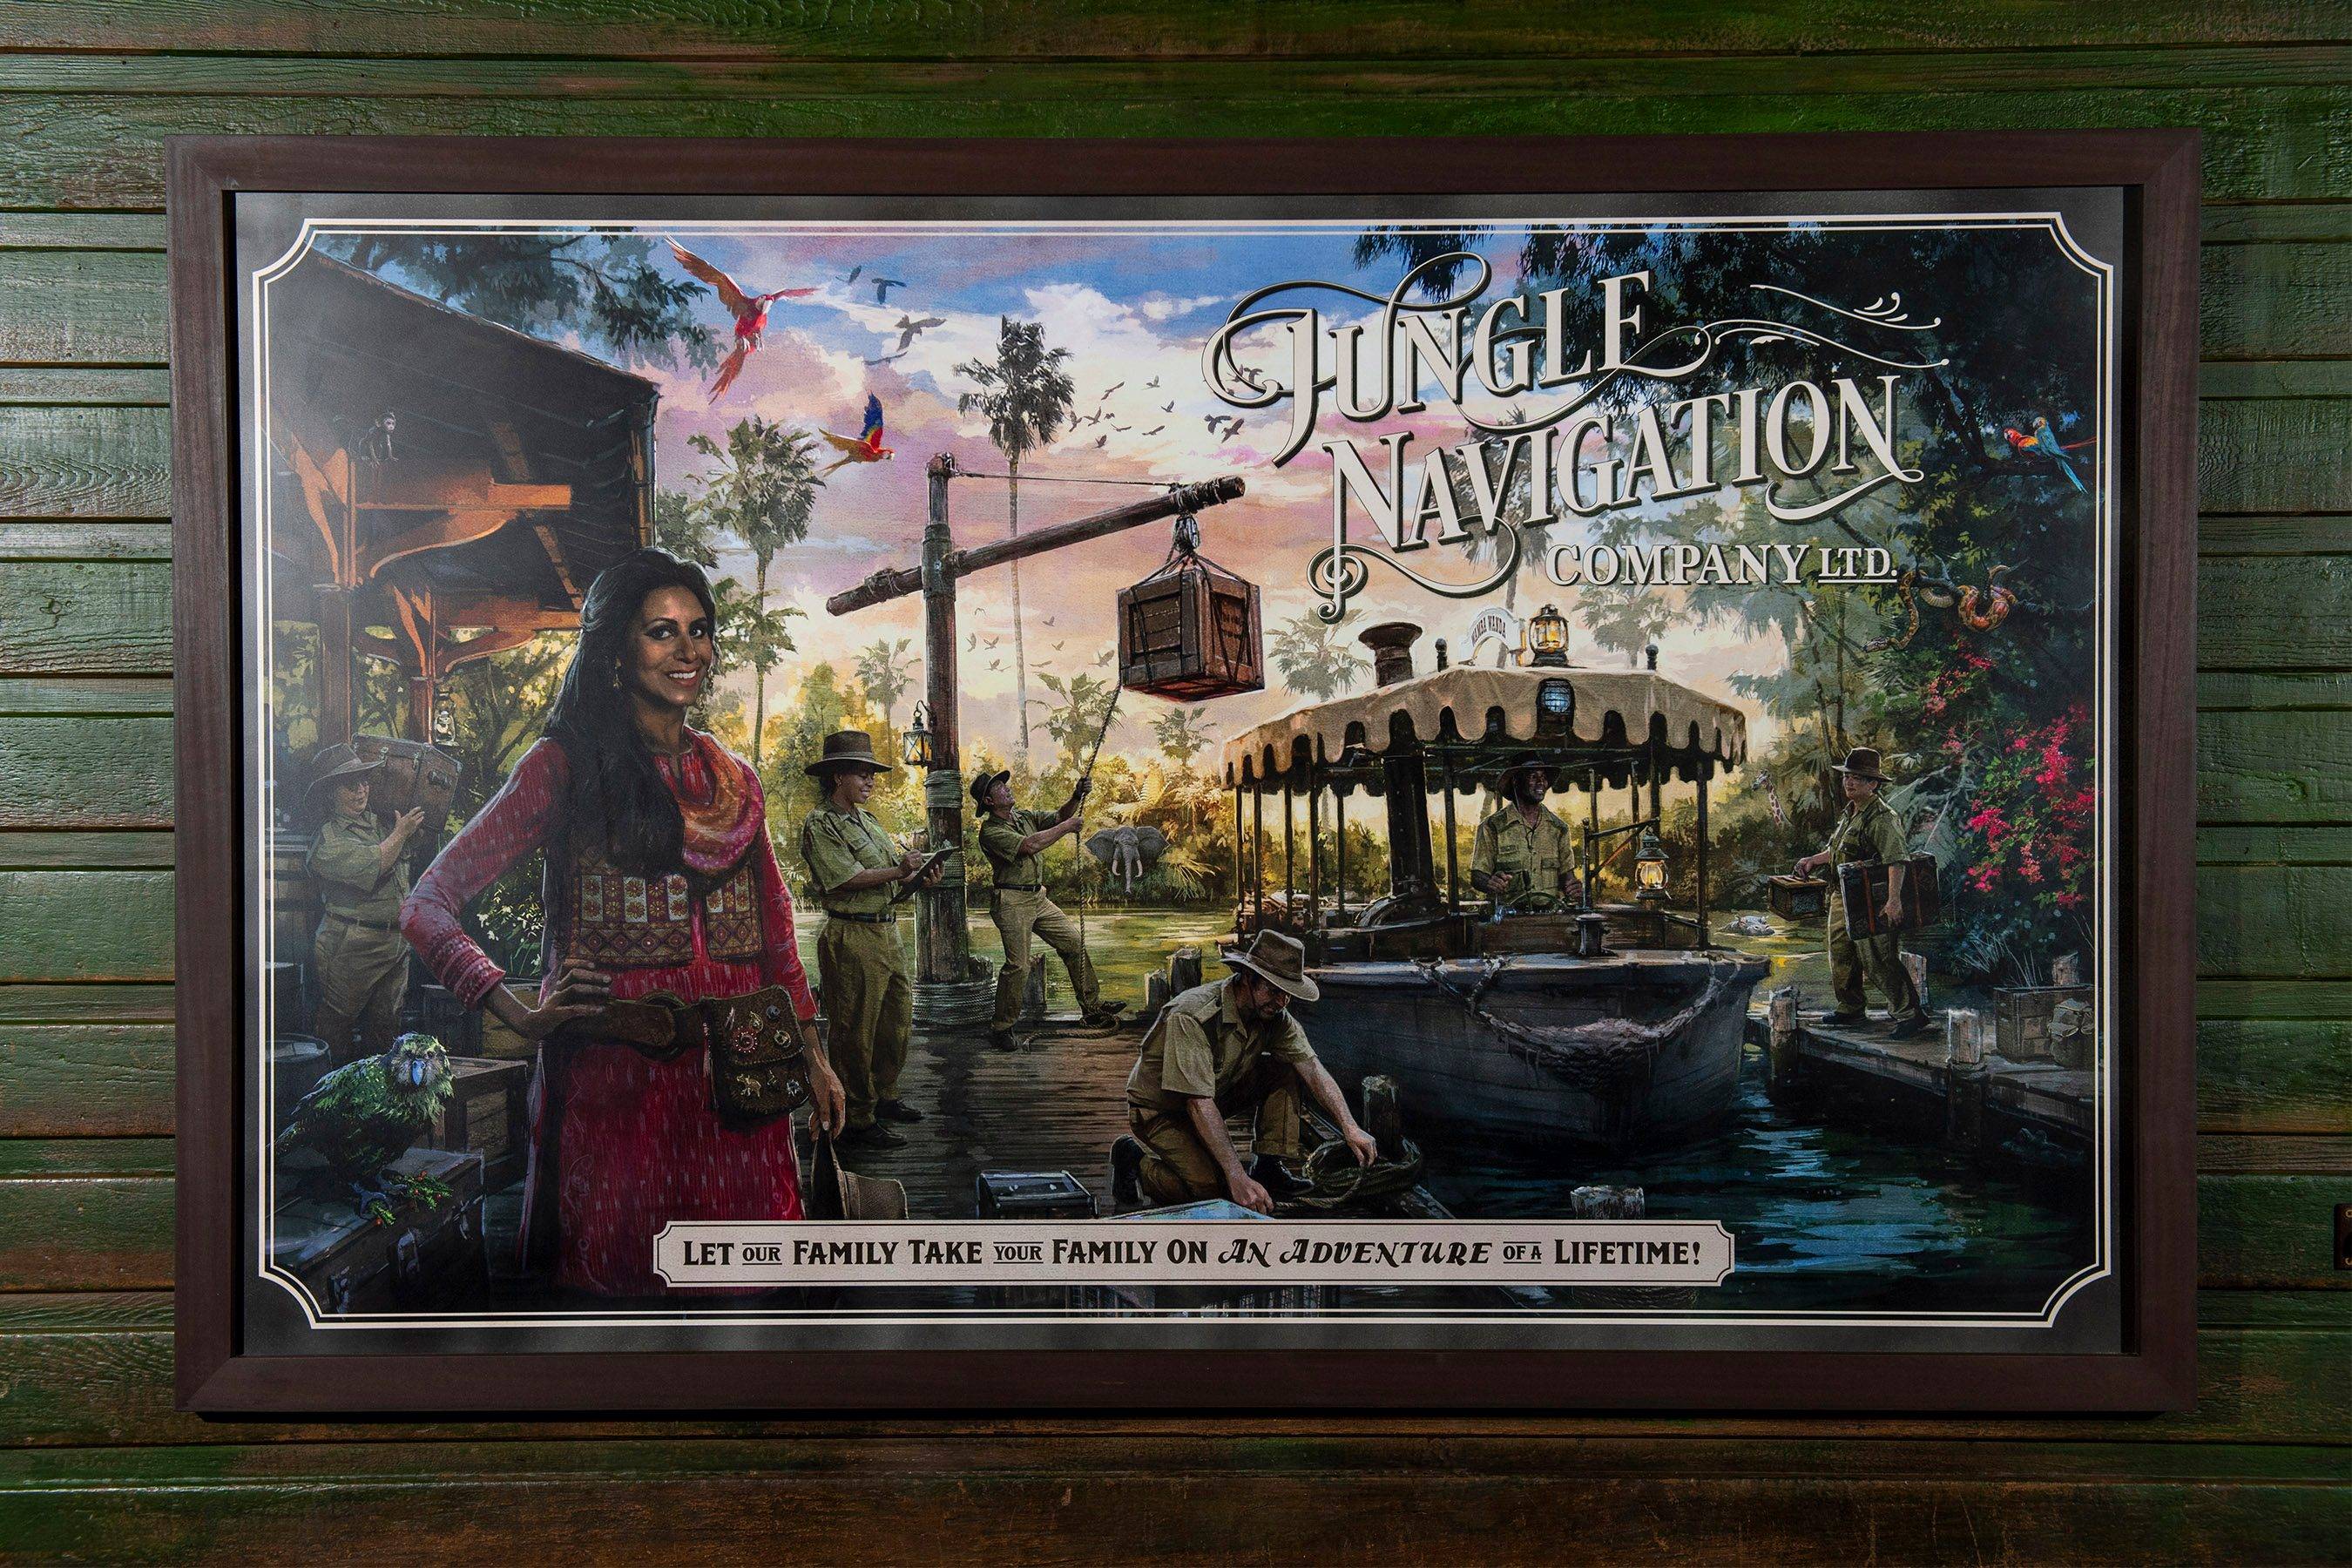 Disney completes the updates to the Jungle Cruise in Magic Kingdom